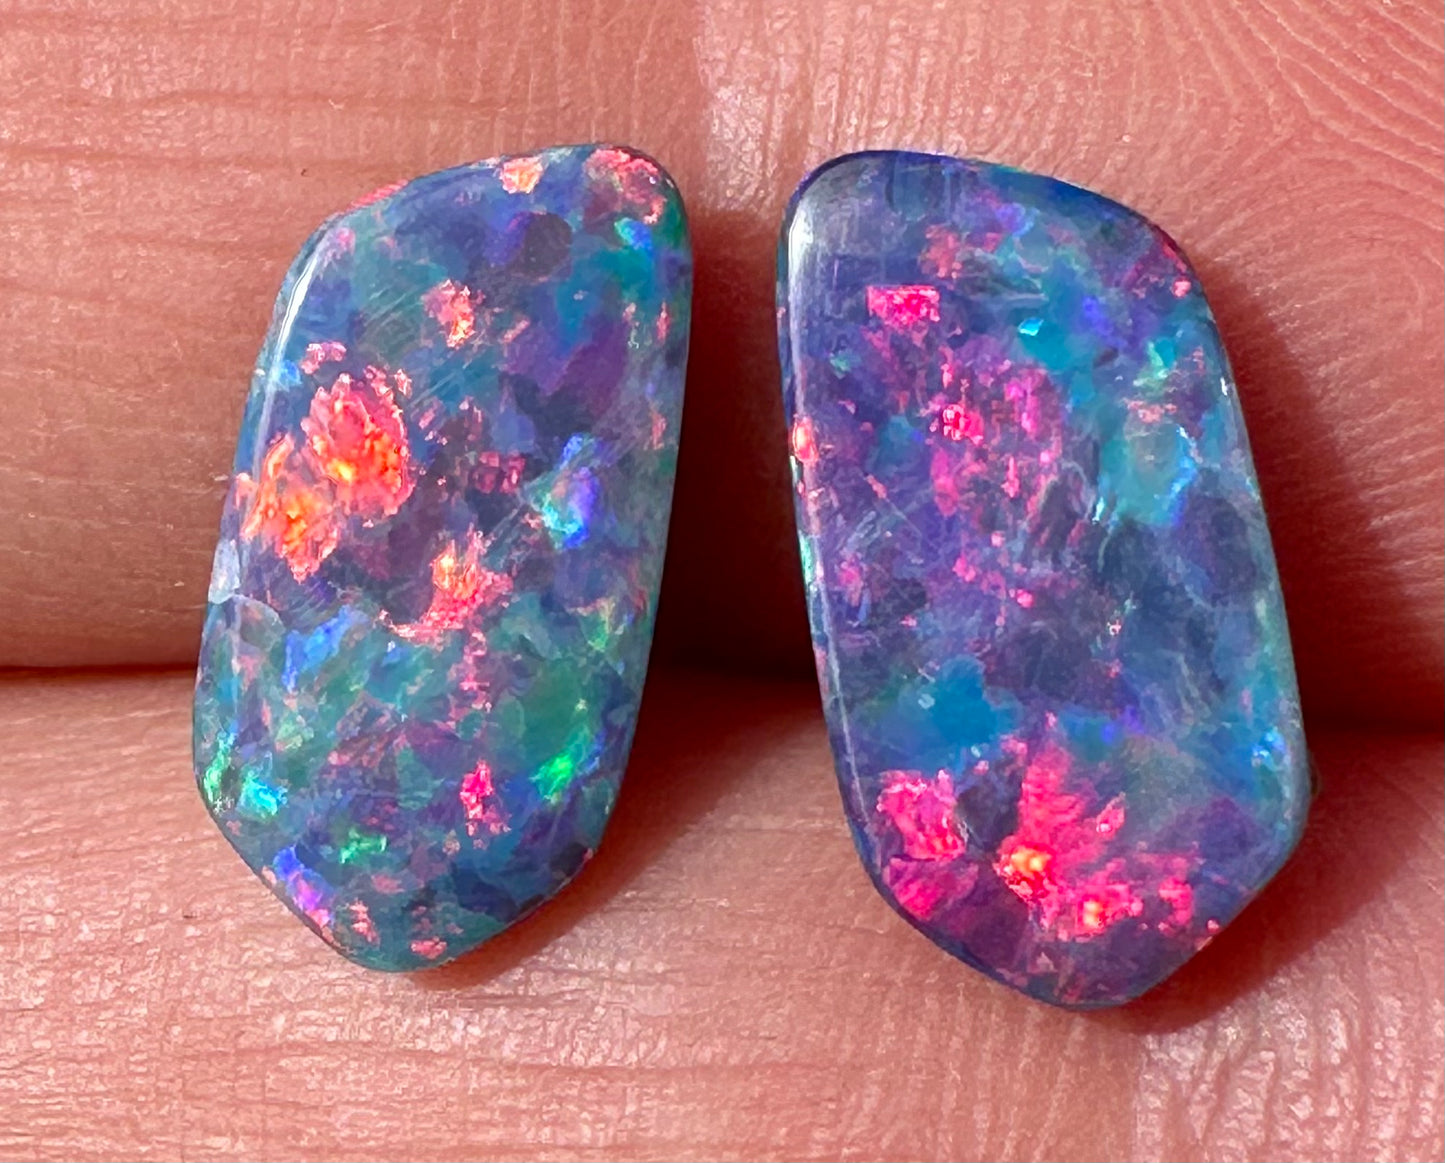 Matching Pair Of Brilliant Opal Doublets